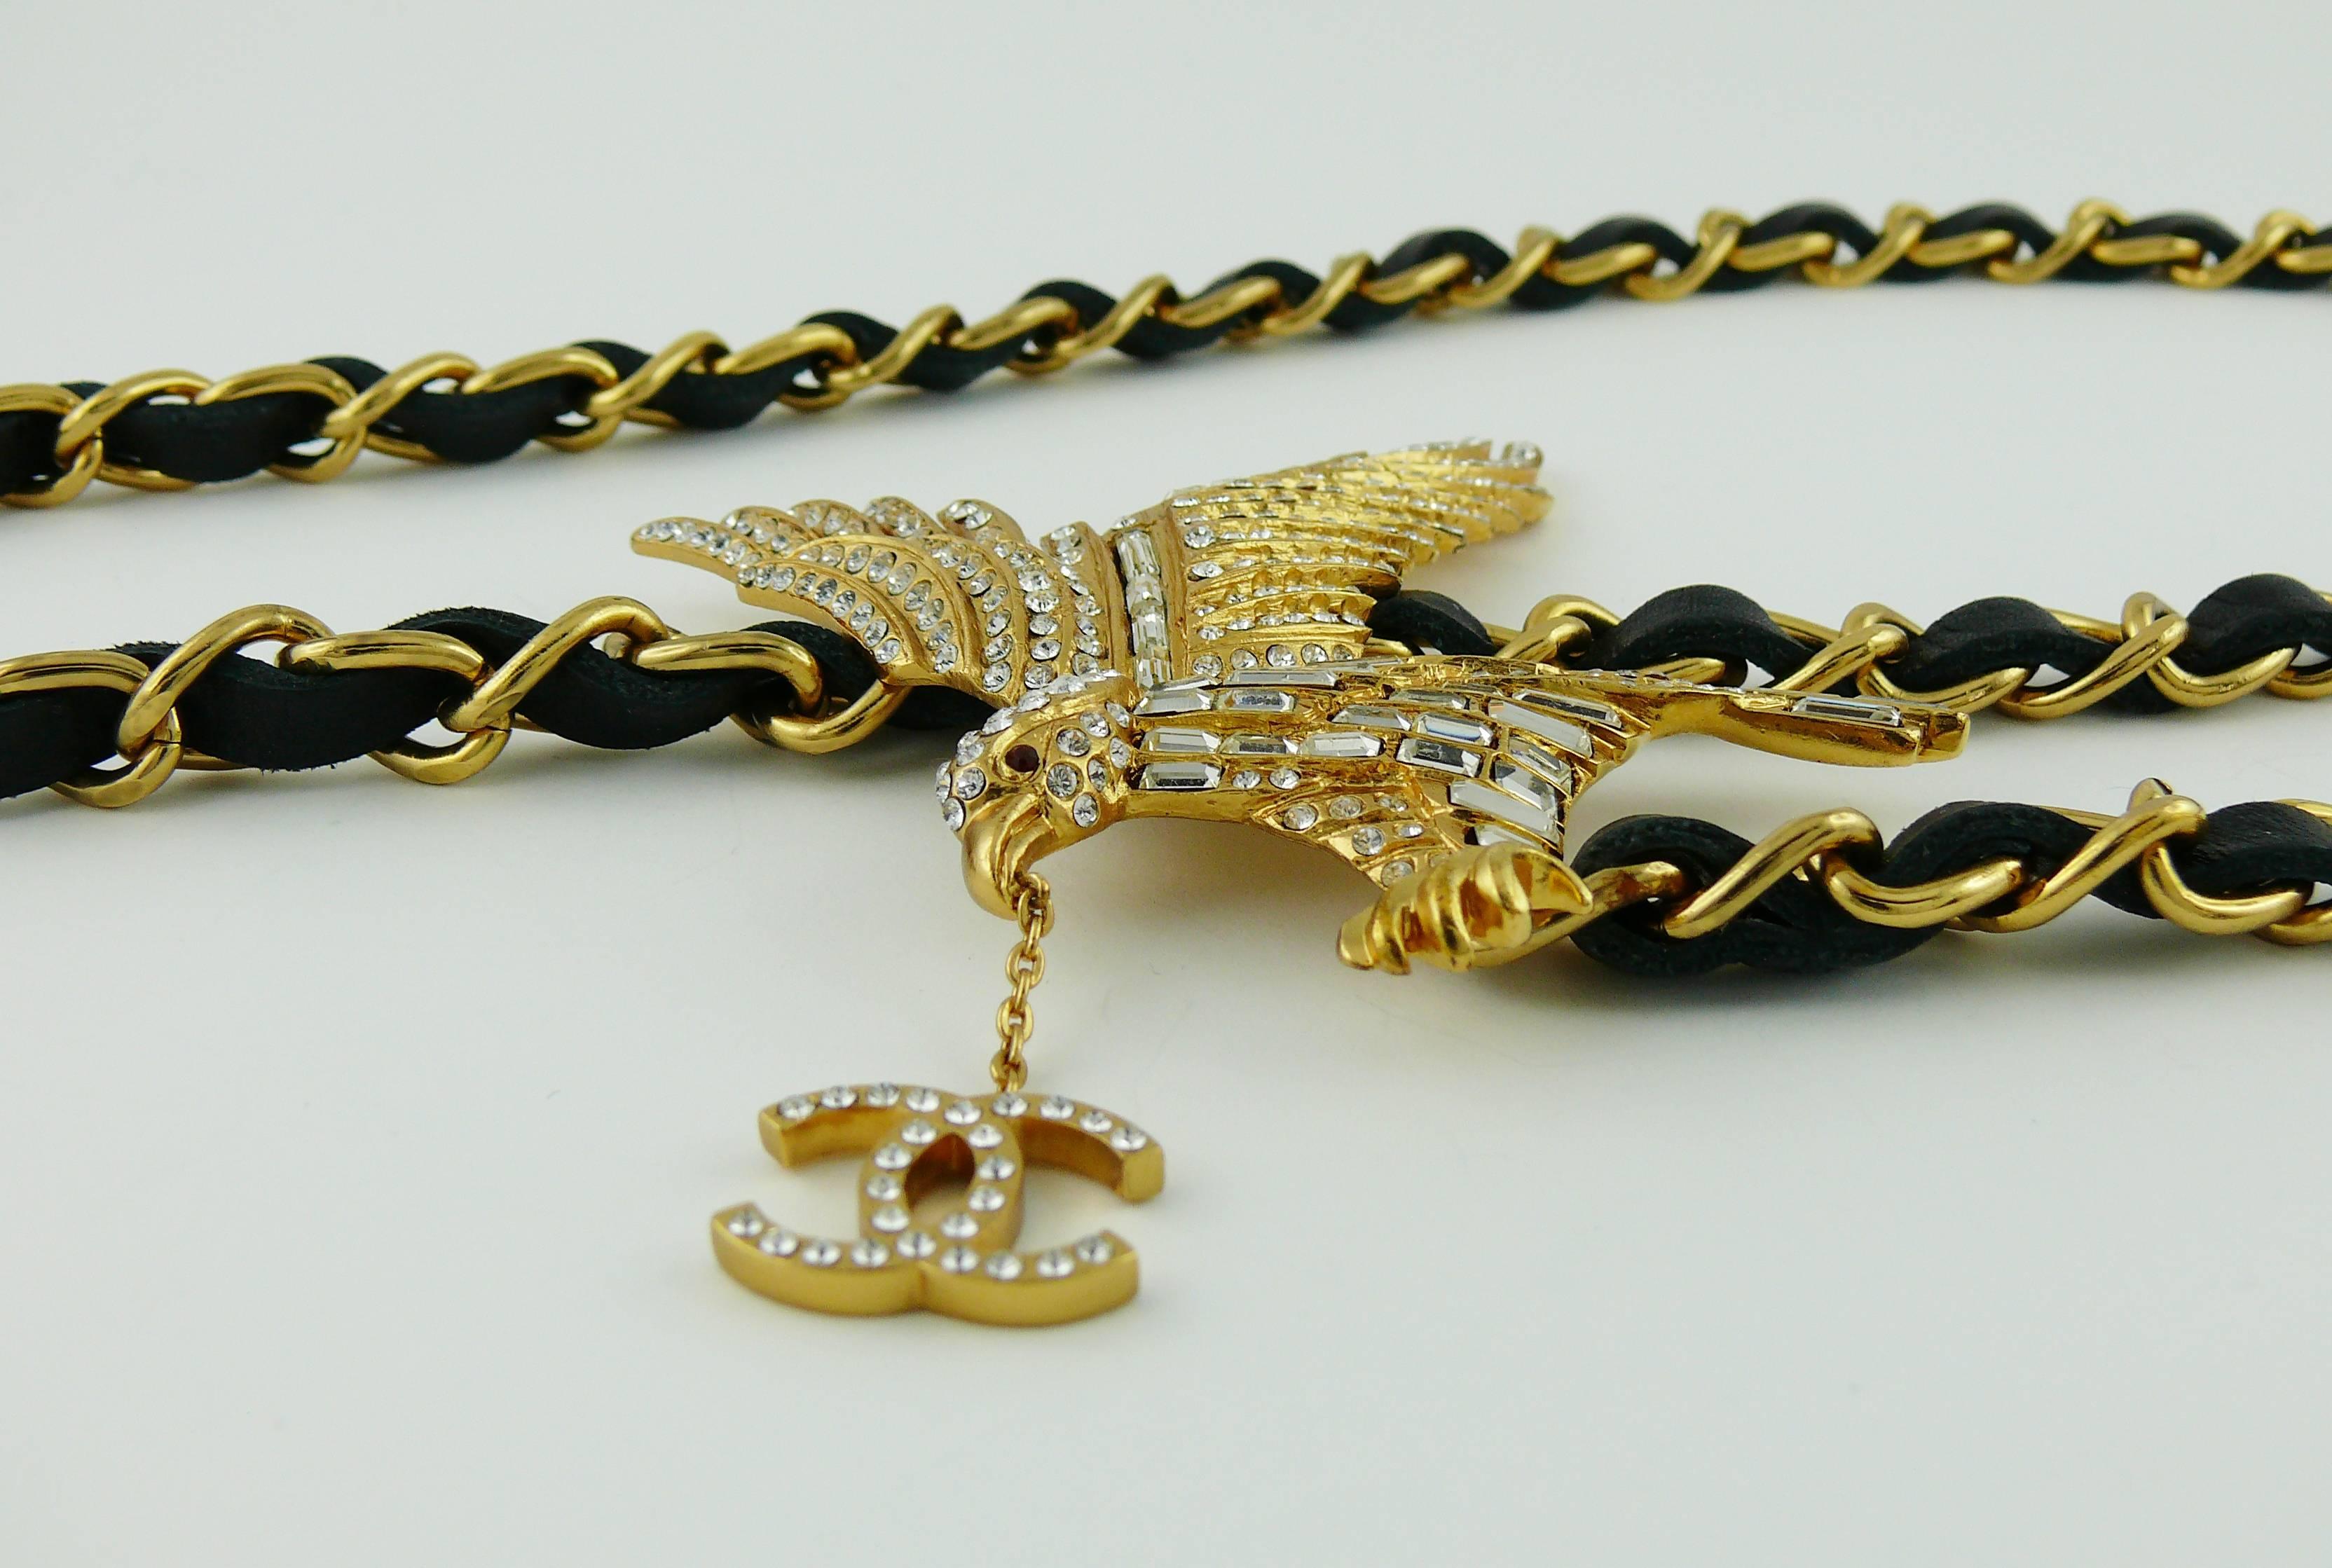 Chanel Rare Jewelled Eagle Black and Gold Runway Belt or Necklace 1